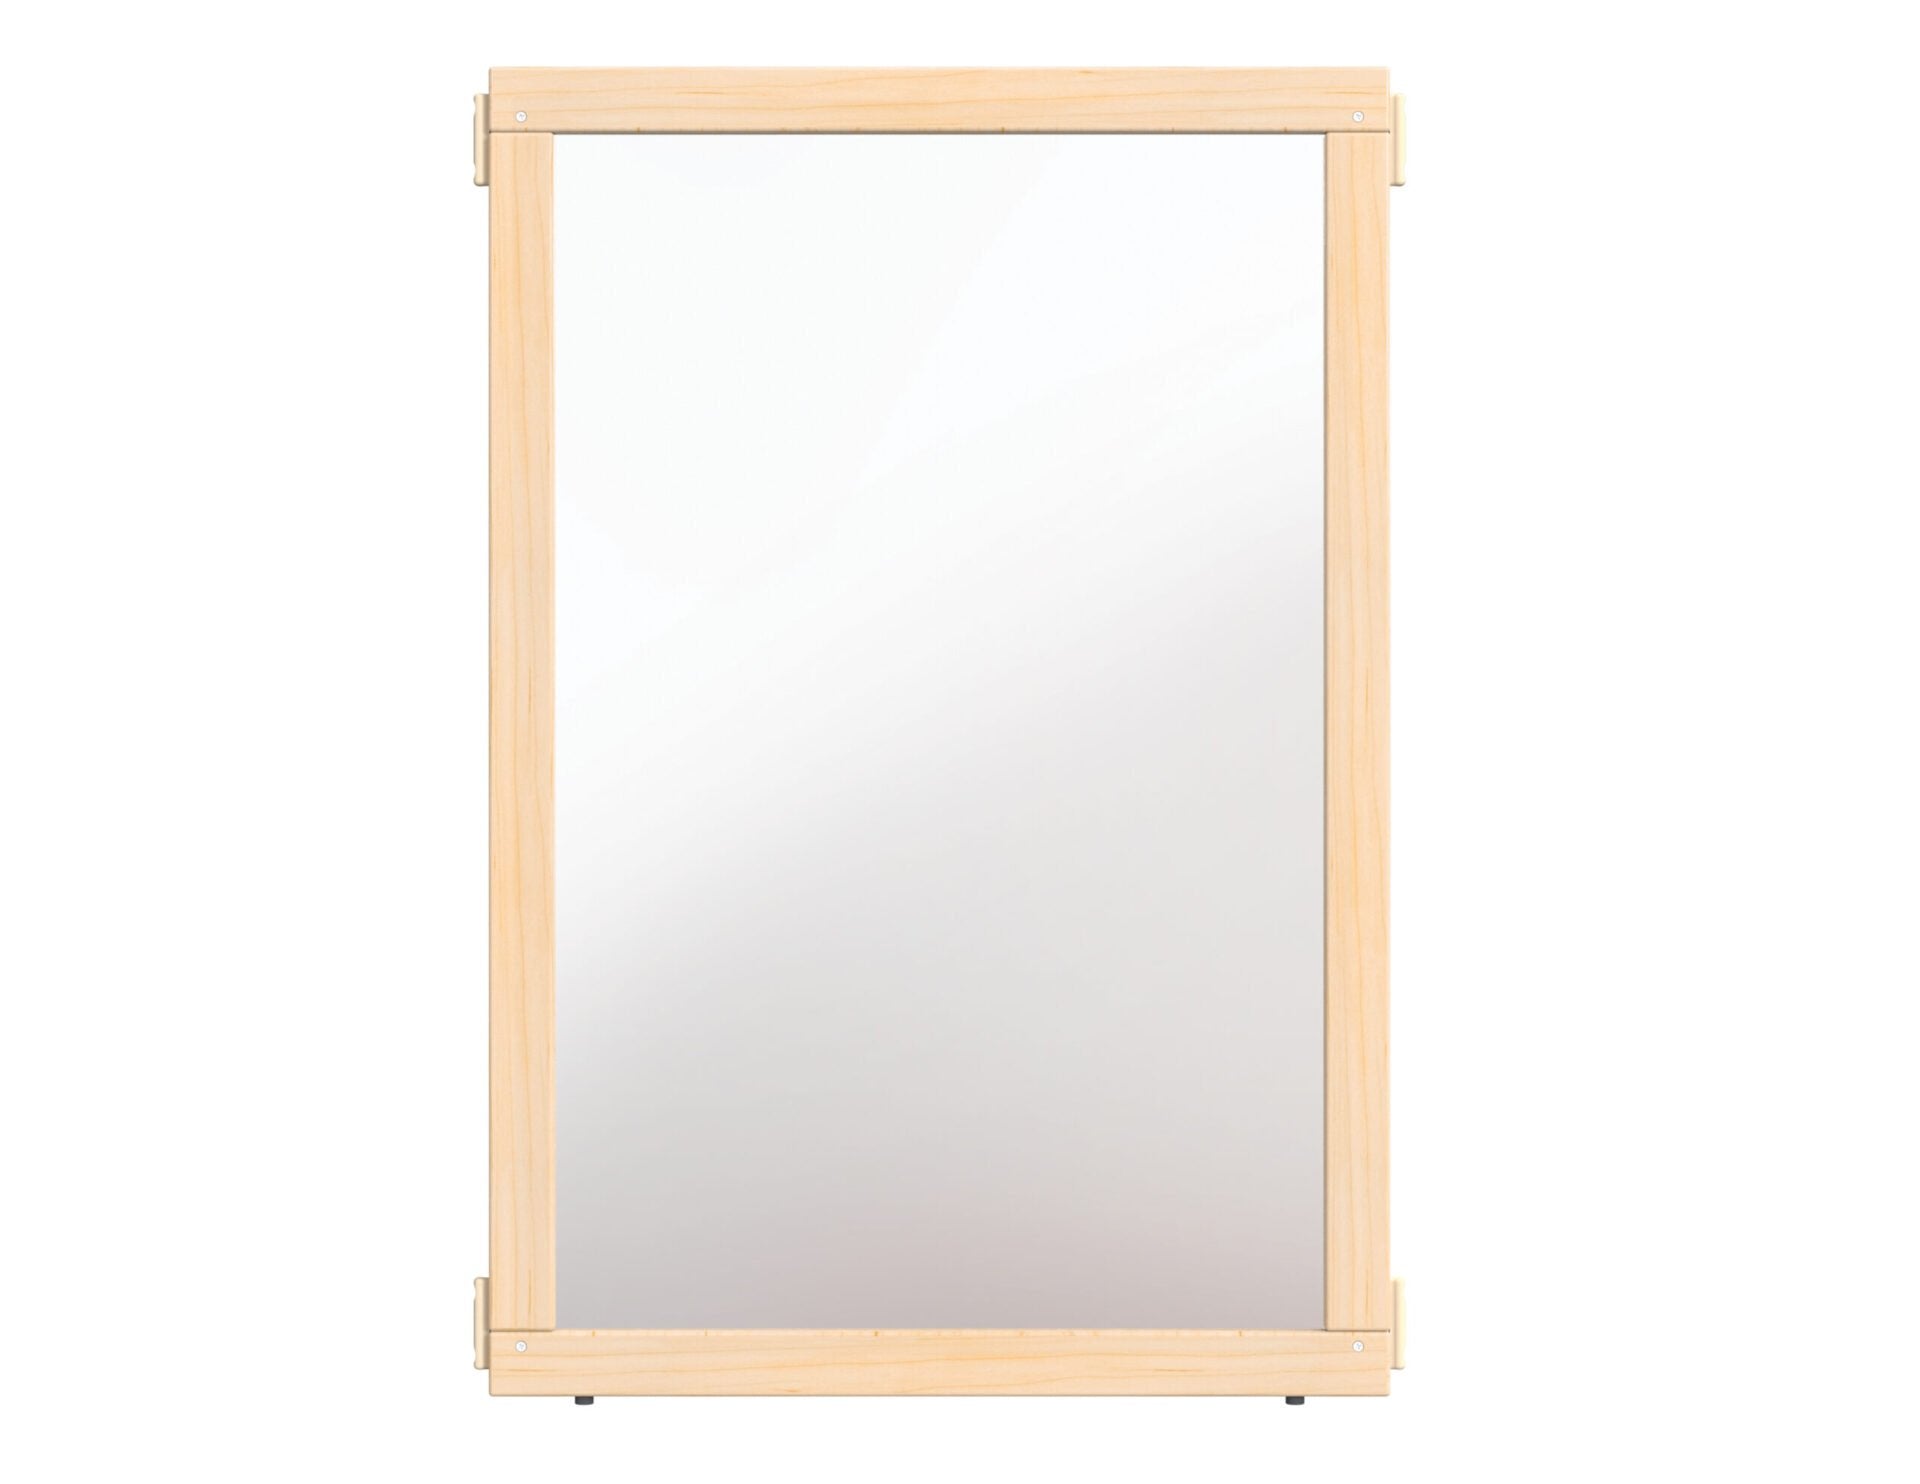 KYDZ SuiteÂ® Panel - A-height - 24